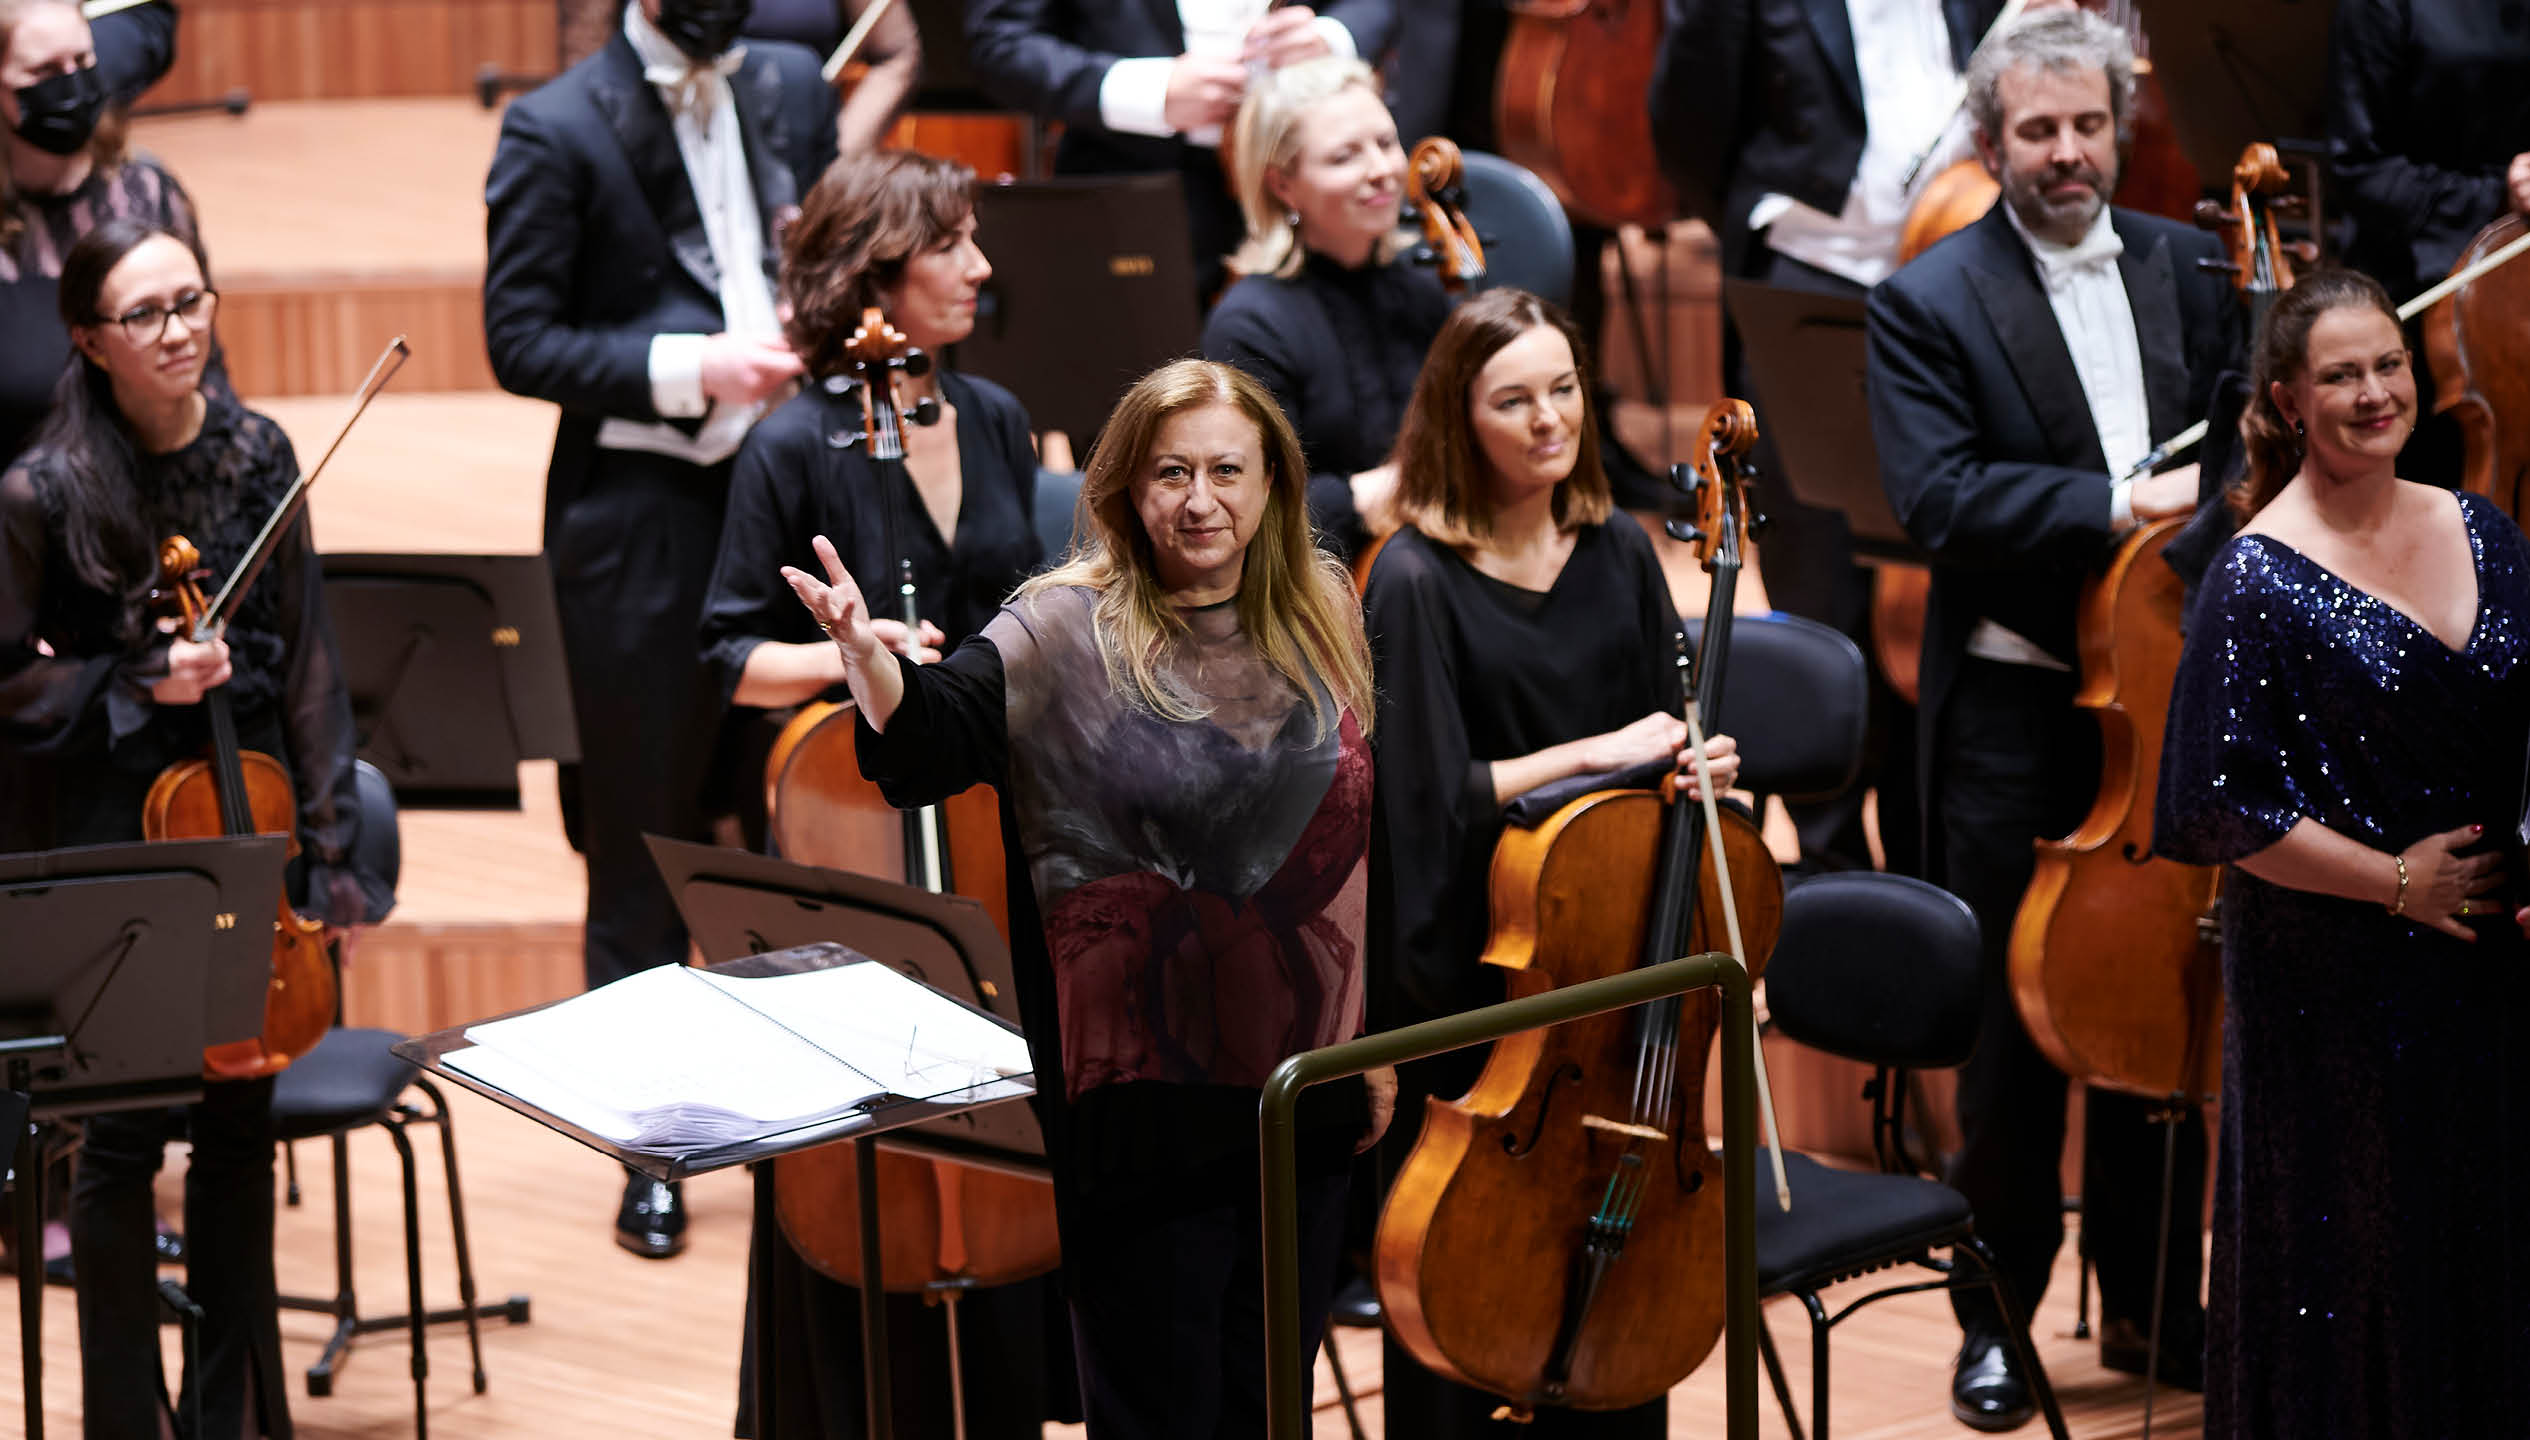 A woman in her 60s with long brown hair stands in front of an orchestra at the conductors desk, waving to the orchestra.